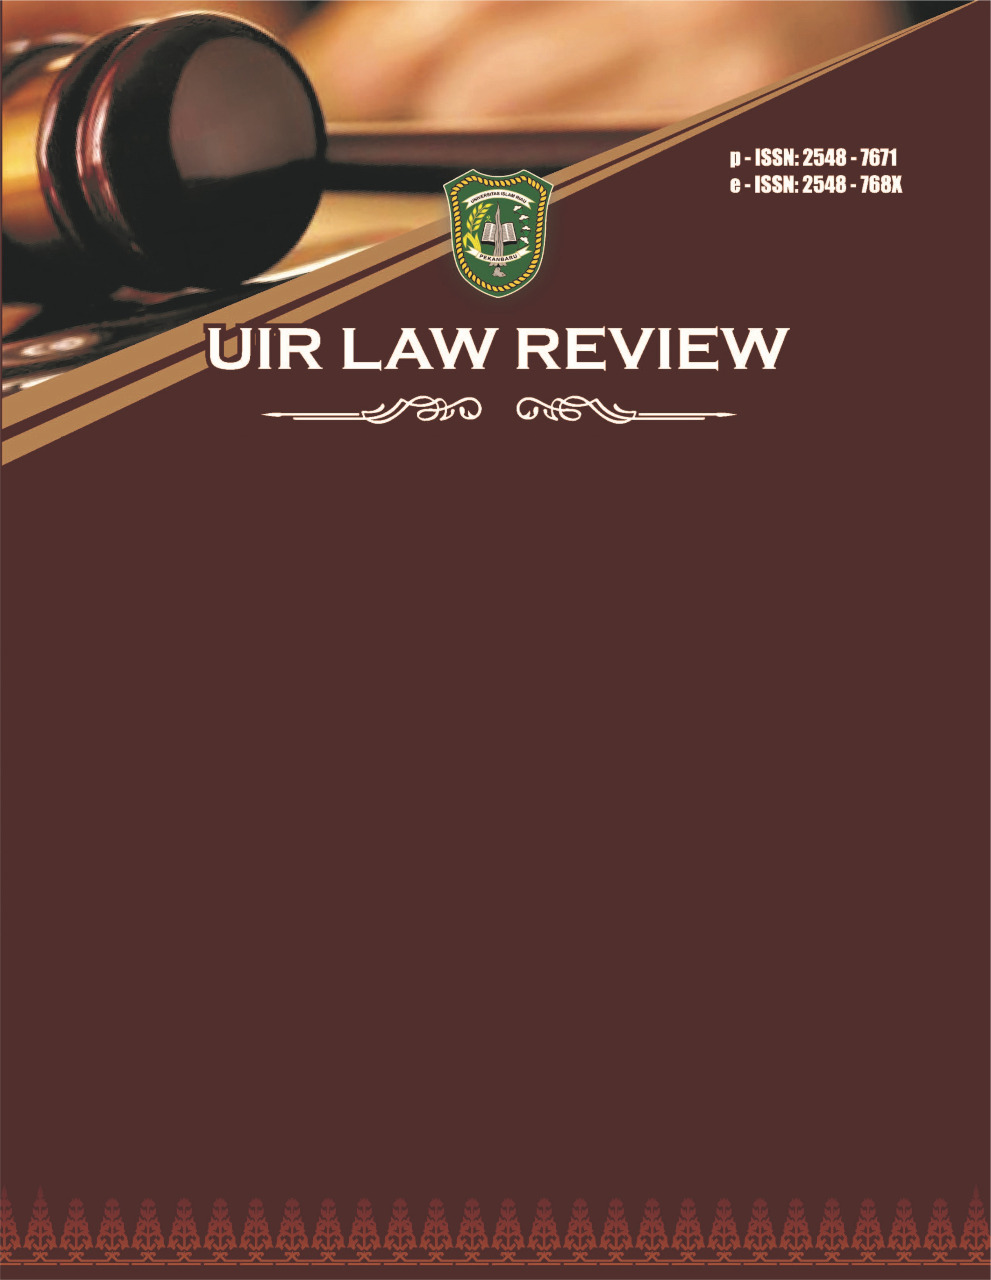 					View Vol. 4 No. 2 (2020): UIR Law Review
				